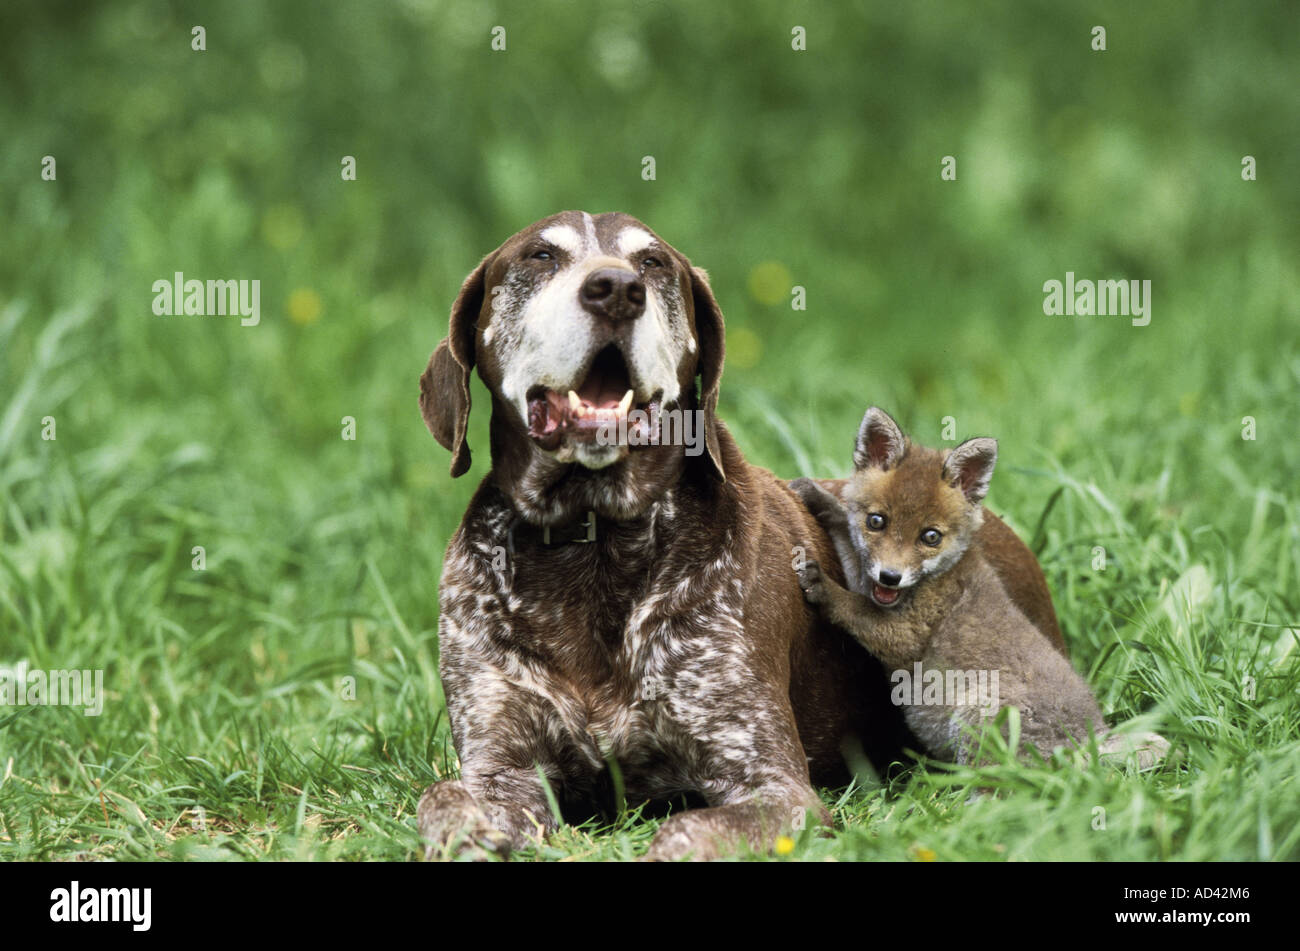 animal friendship : German Shorthaired Pointer dog and young red fox Stock Photo